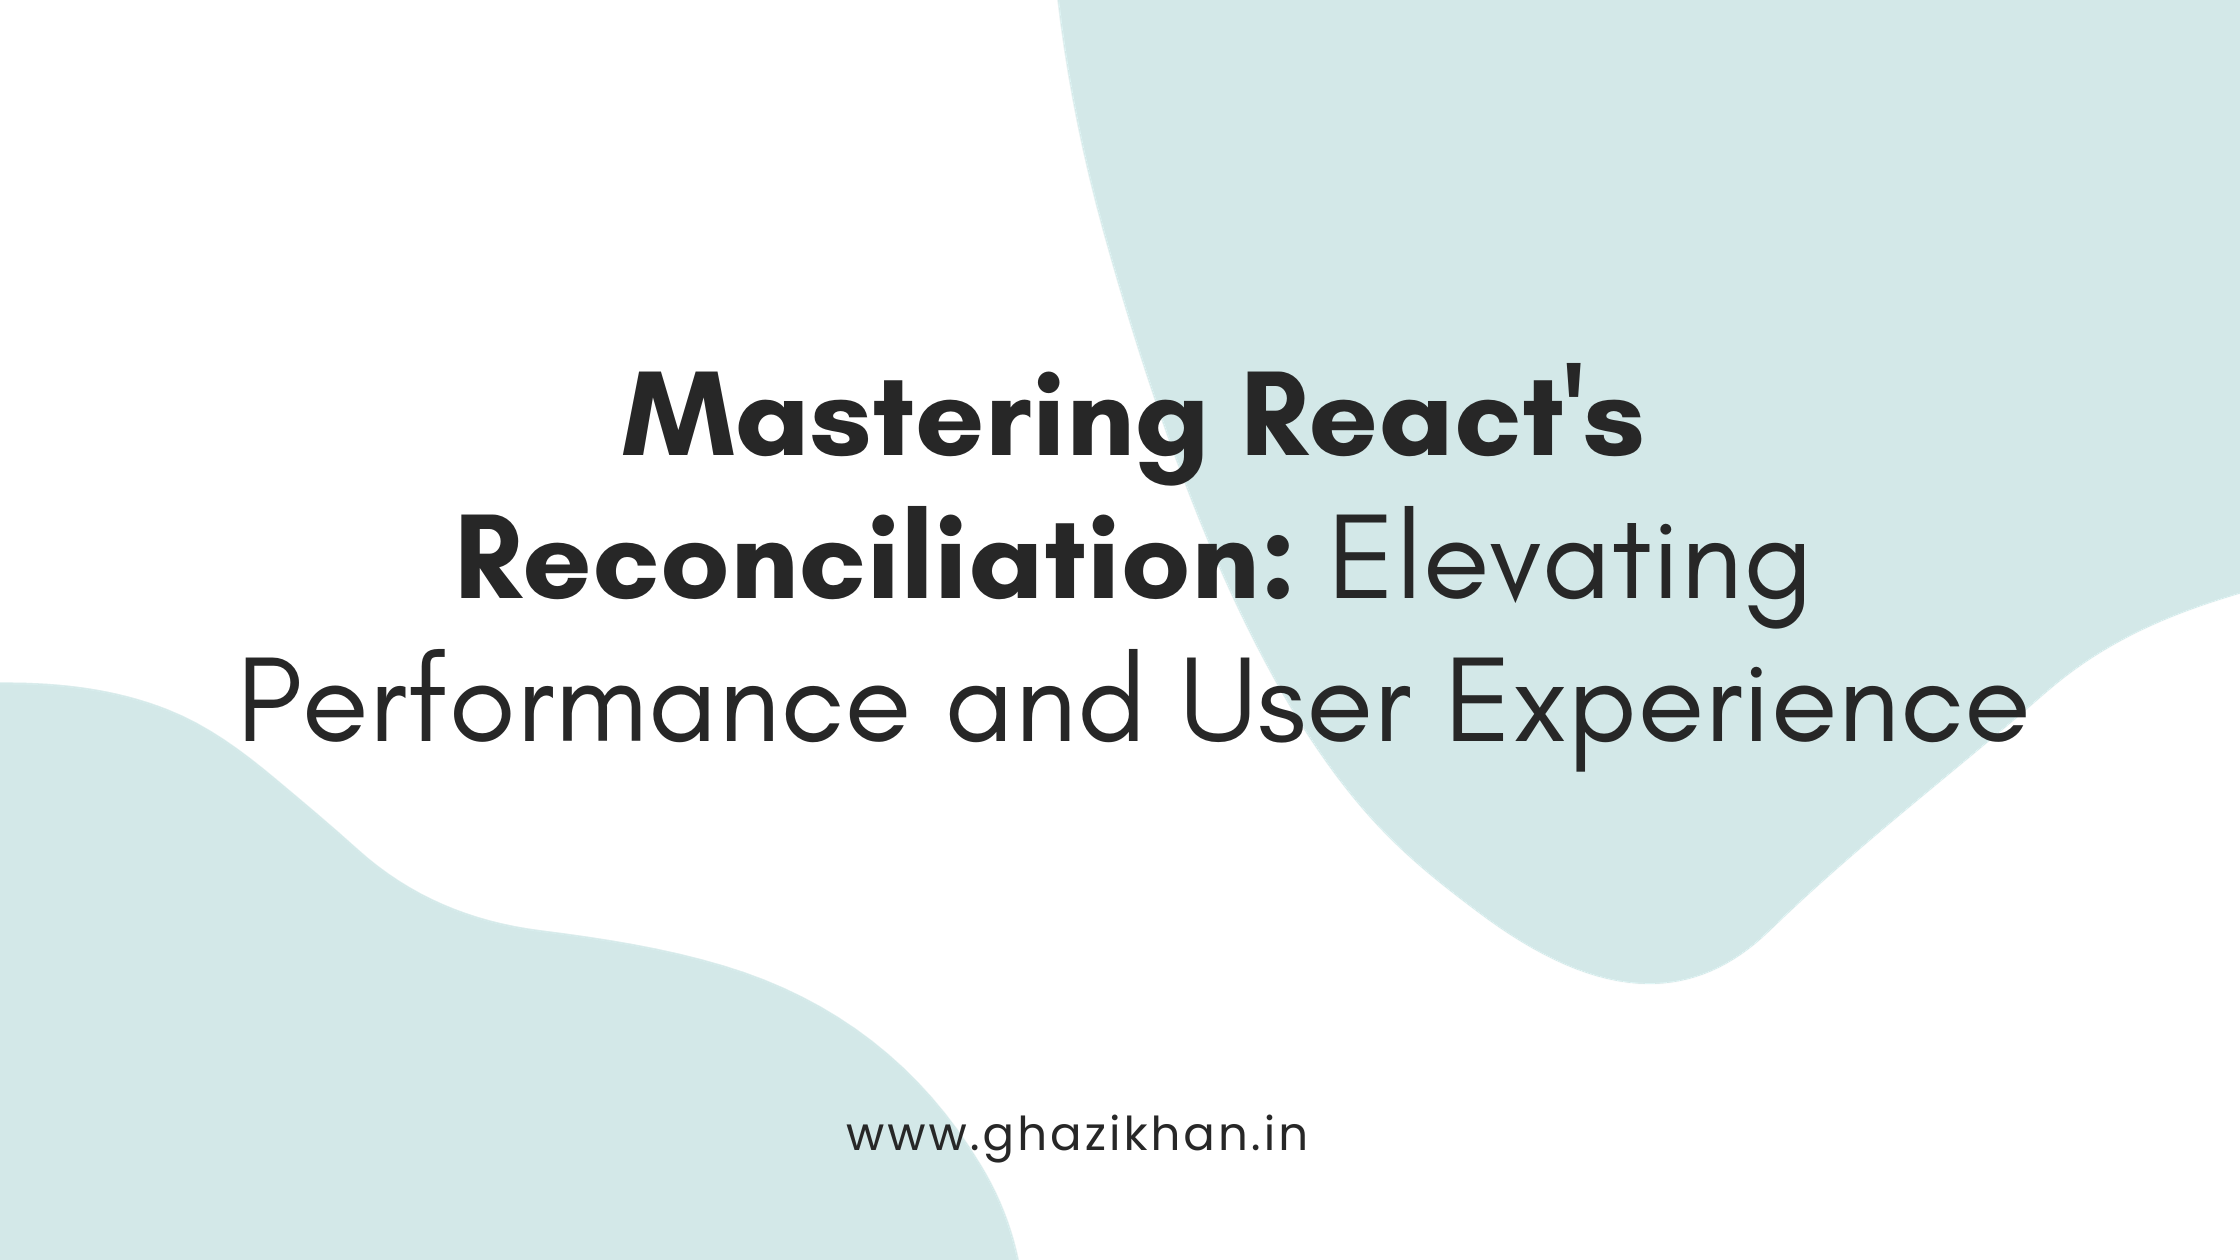 Mastering React's Reconciliation: Elevating Performance and User Experience